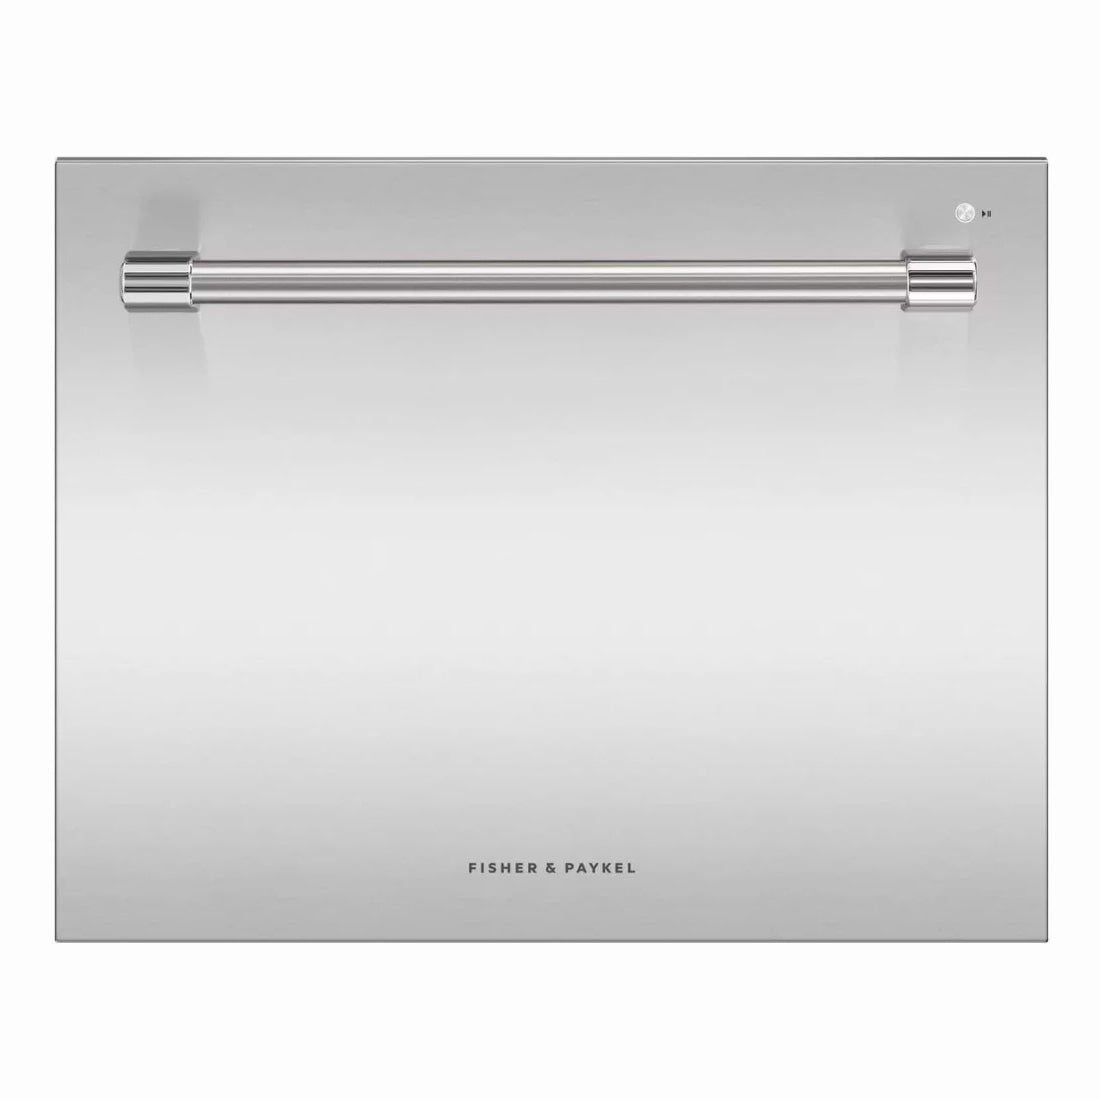 DD24SV2T9 - DISHWASHERS - Fisher & Paykel - Top Controls Single Drawer - Stainless Steel - Open Box - DISHWASHERS - BonPrix Électroménagers